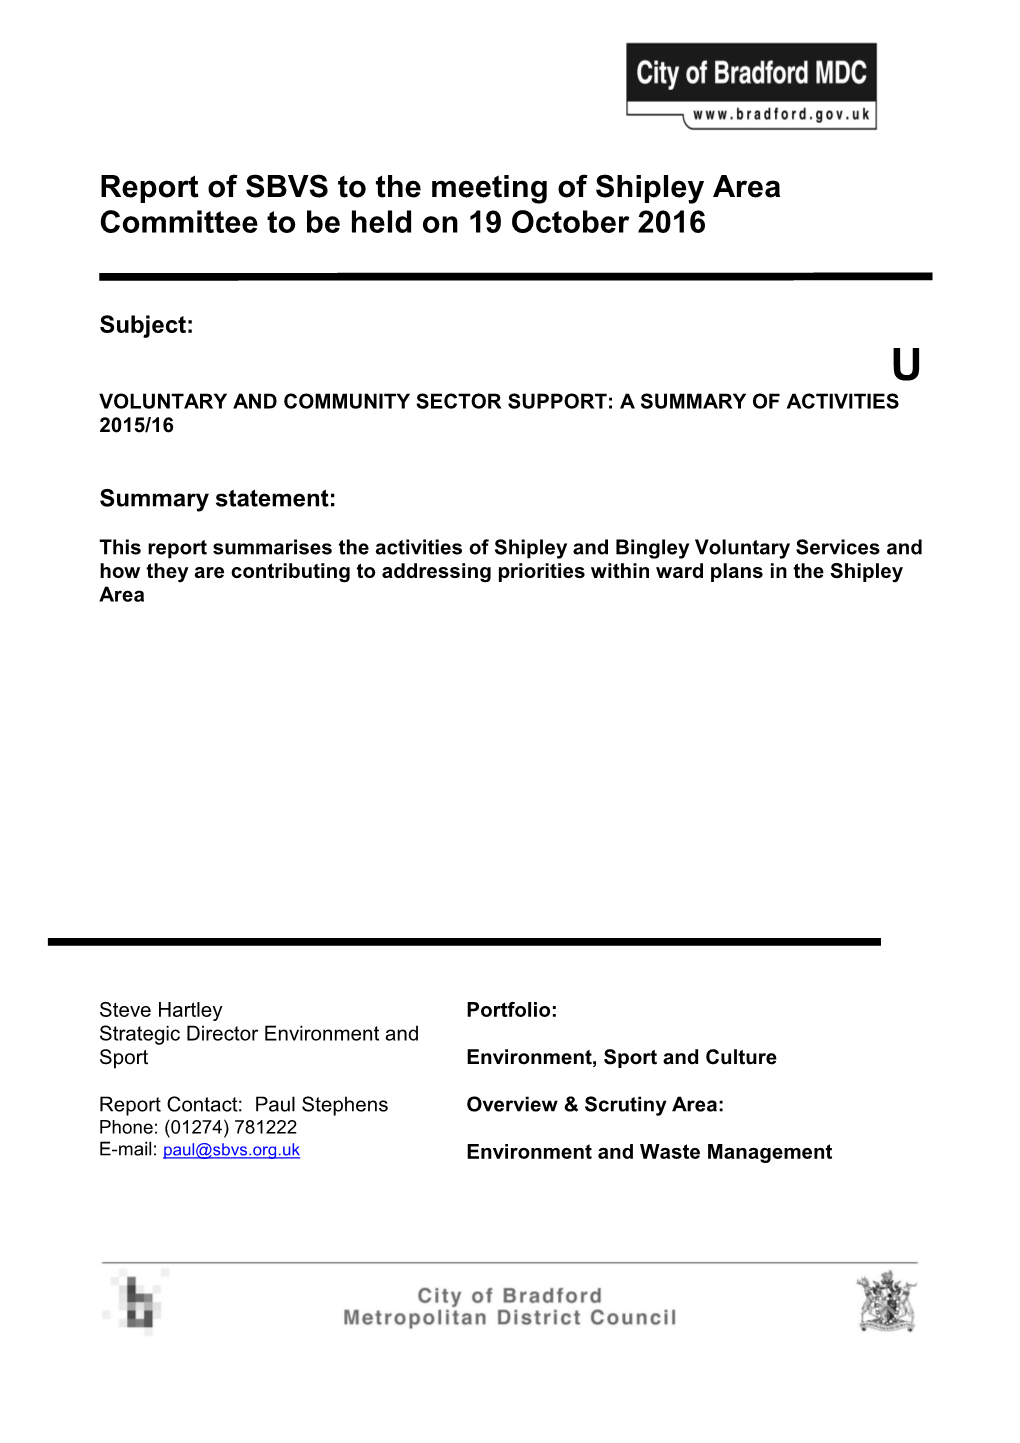 Report of SBVS to the Meeting of Shipley Area Committee to Be Held on 19 October 2016